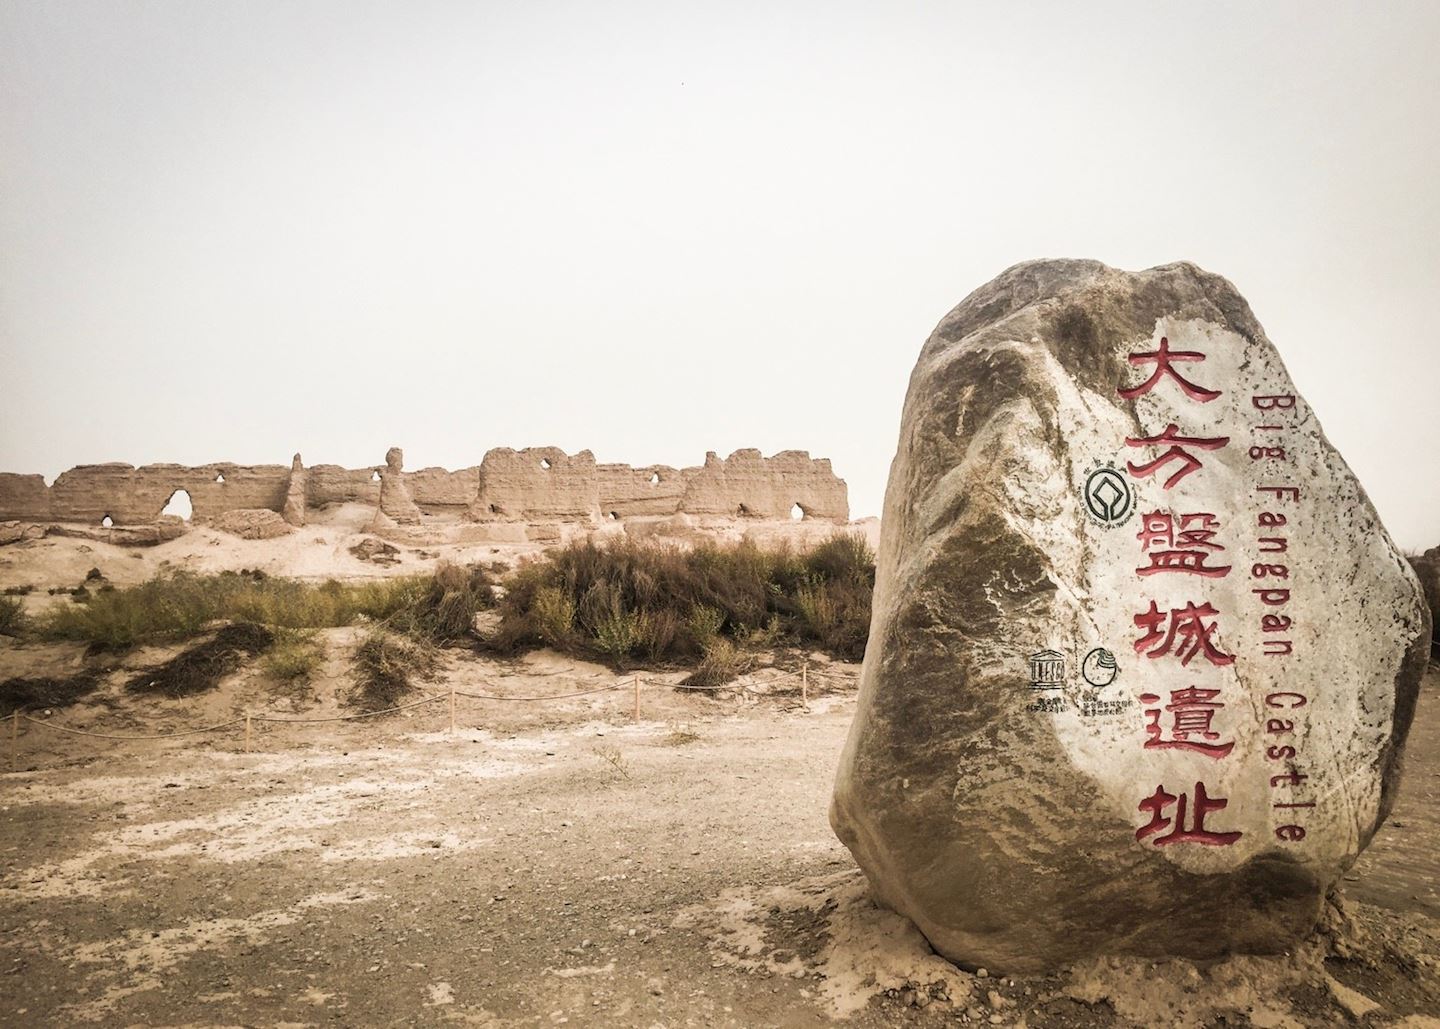 2019 superace ultra marathon stage race dunhuang station